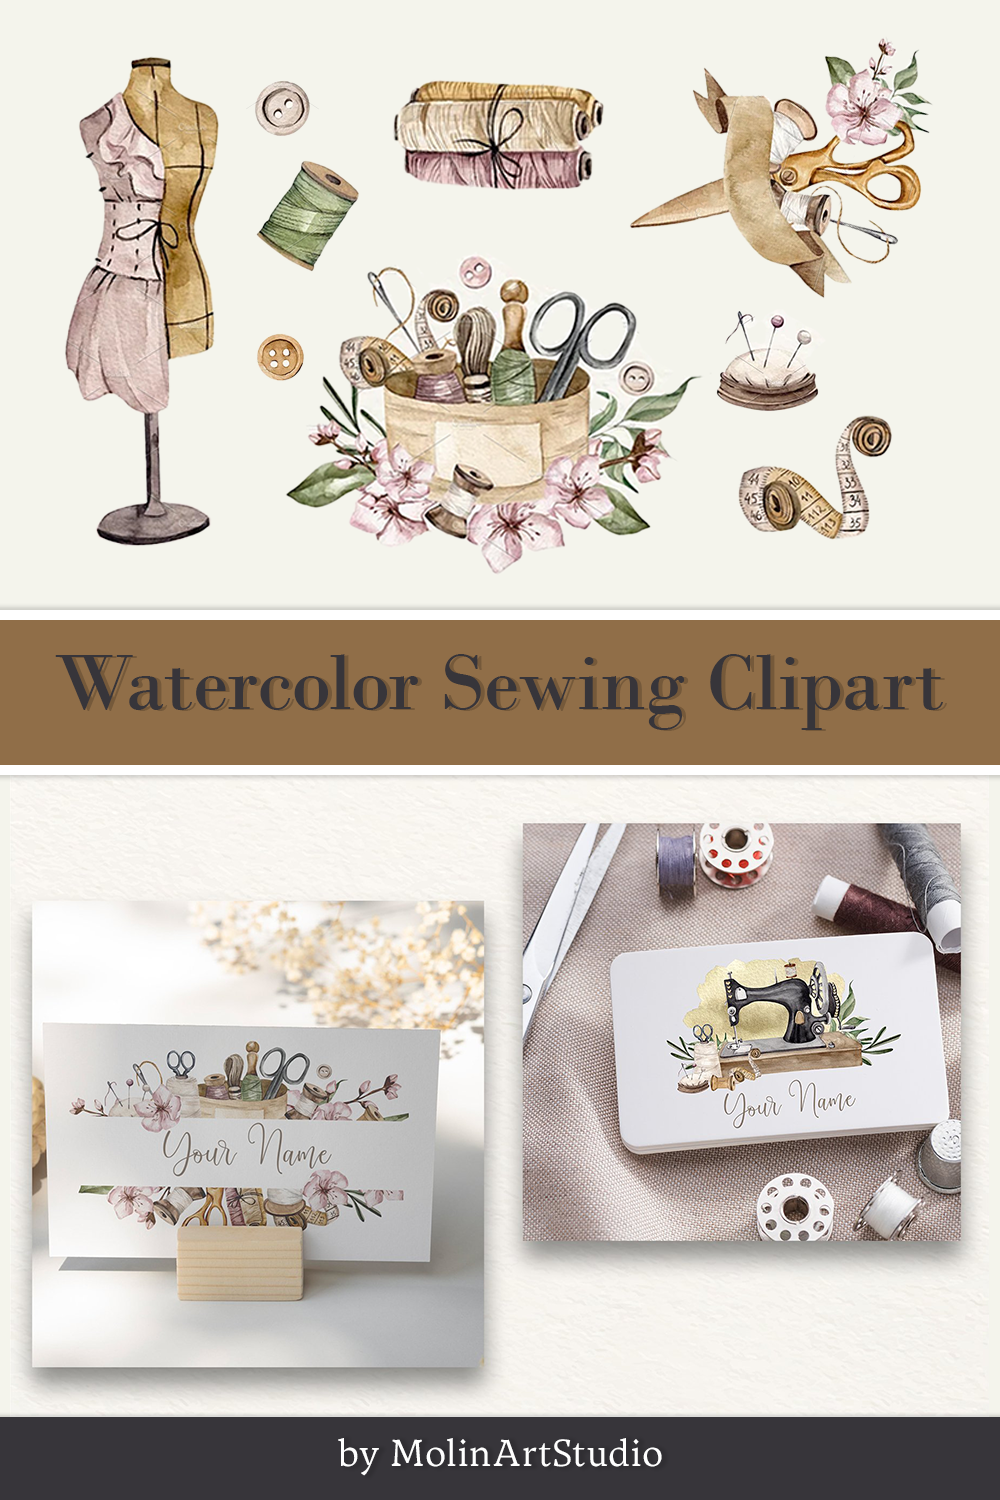 Watercolor sewing clipart of pinterest.